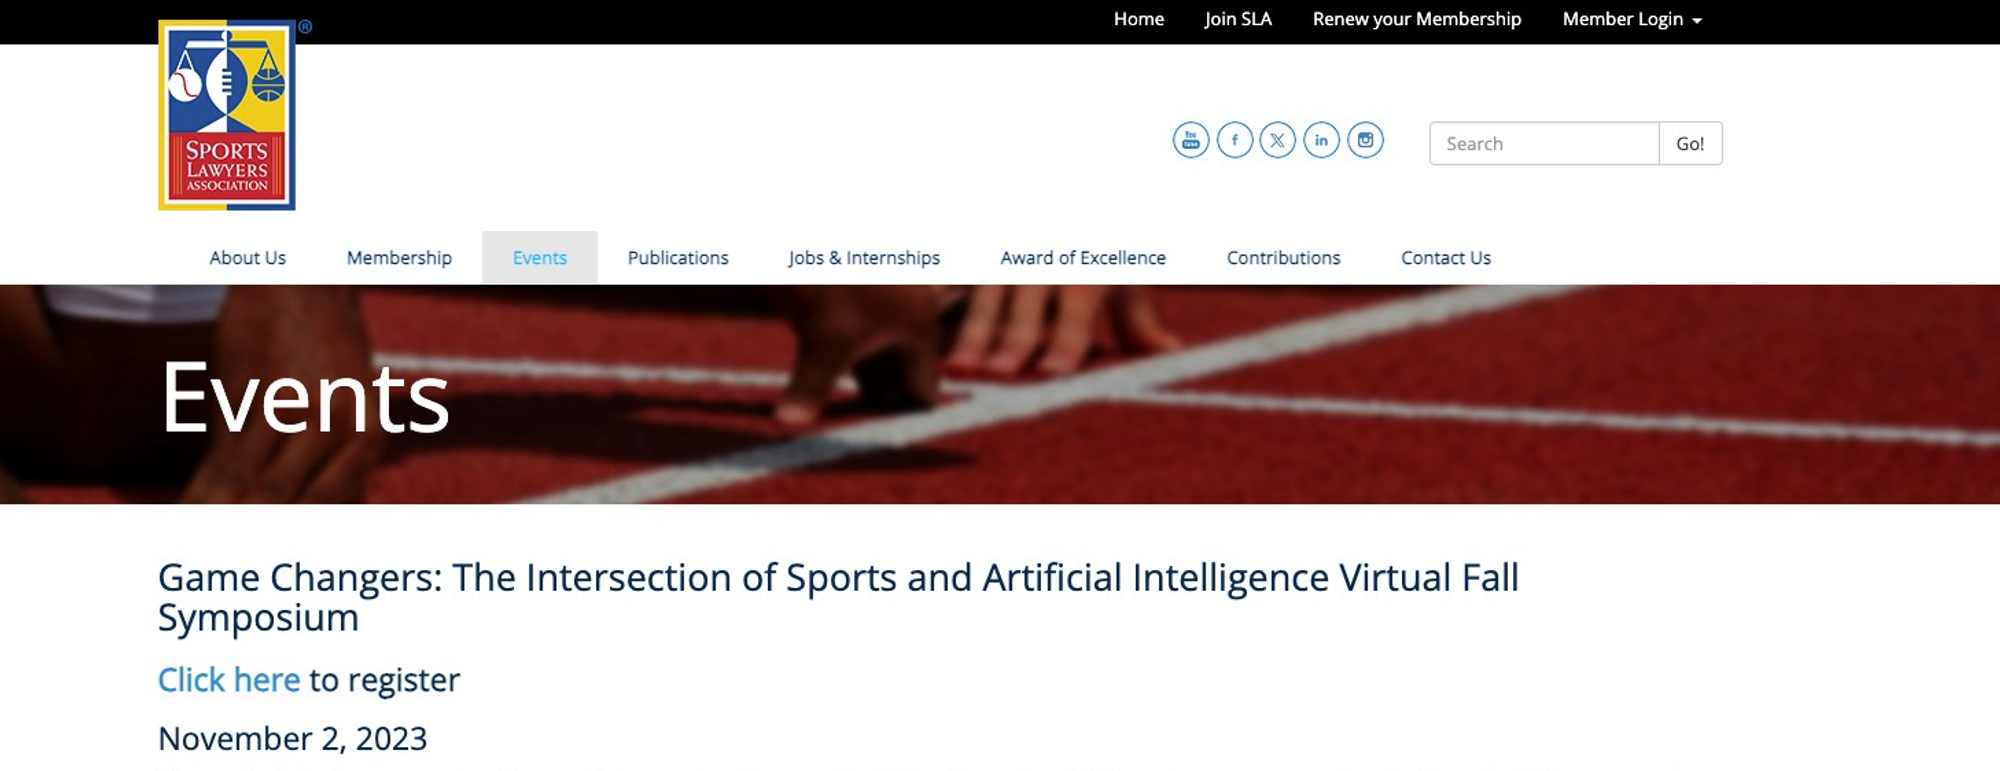 Game Changers: The Intersection of Sports and Artificial Intelligence Virtual Fall Symposium